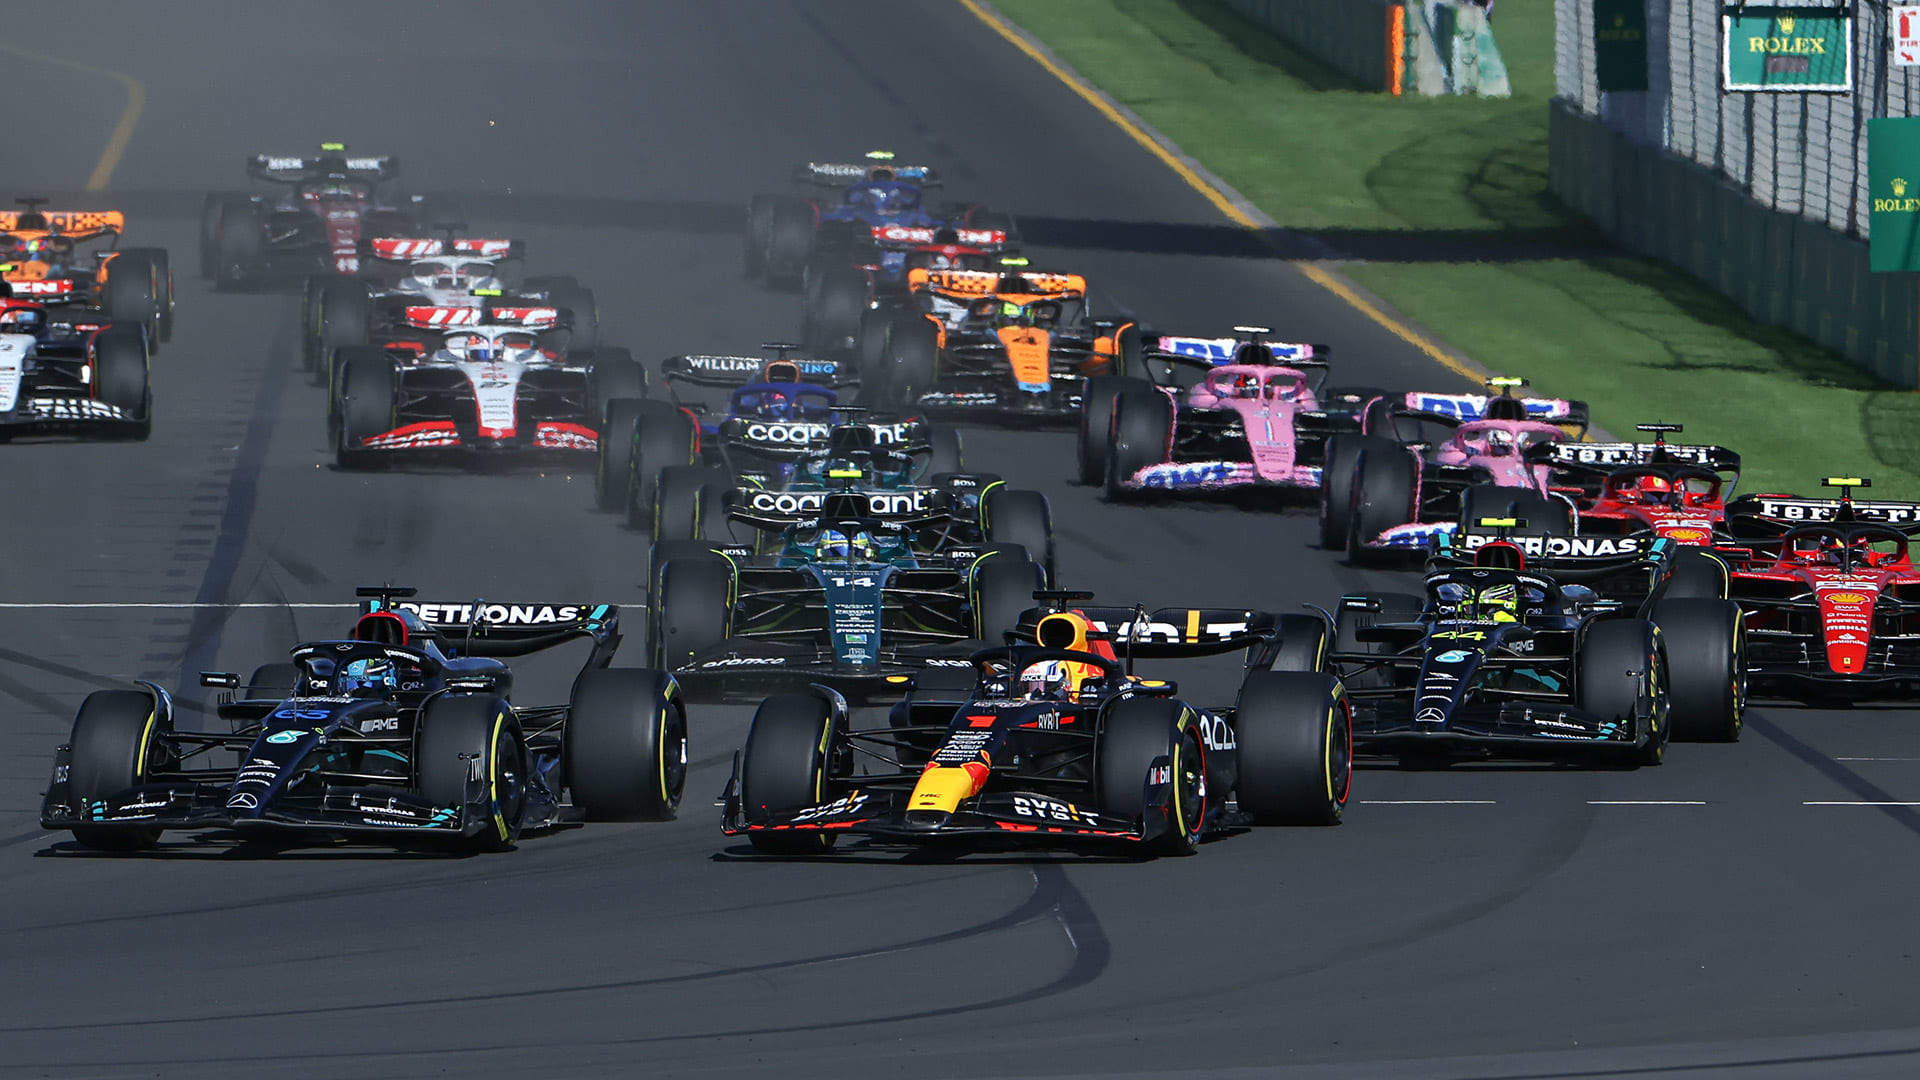 Download or sync the F1 race calendar to your device BVM Sports